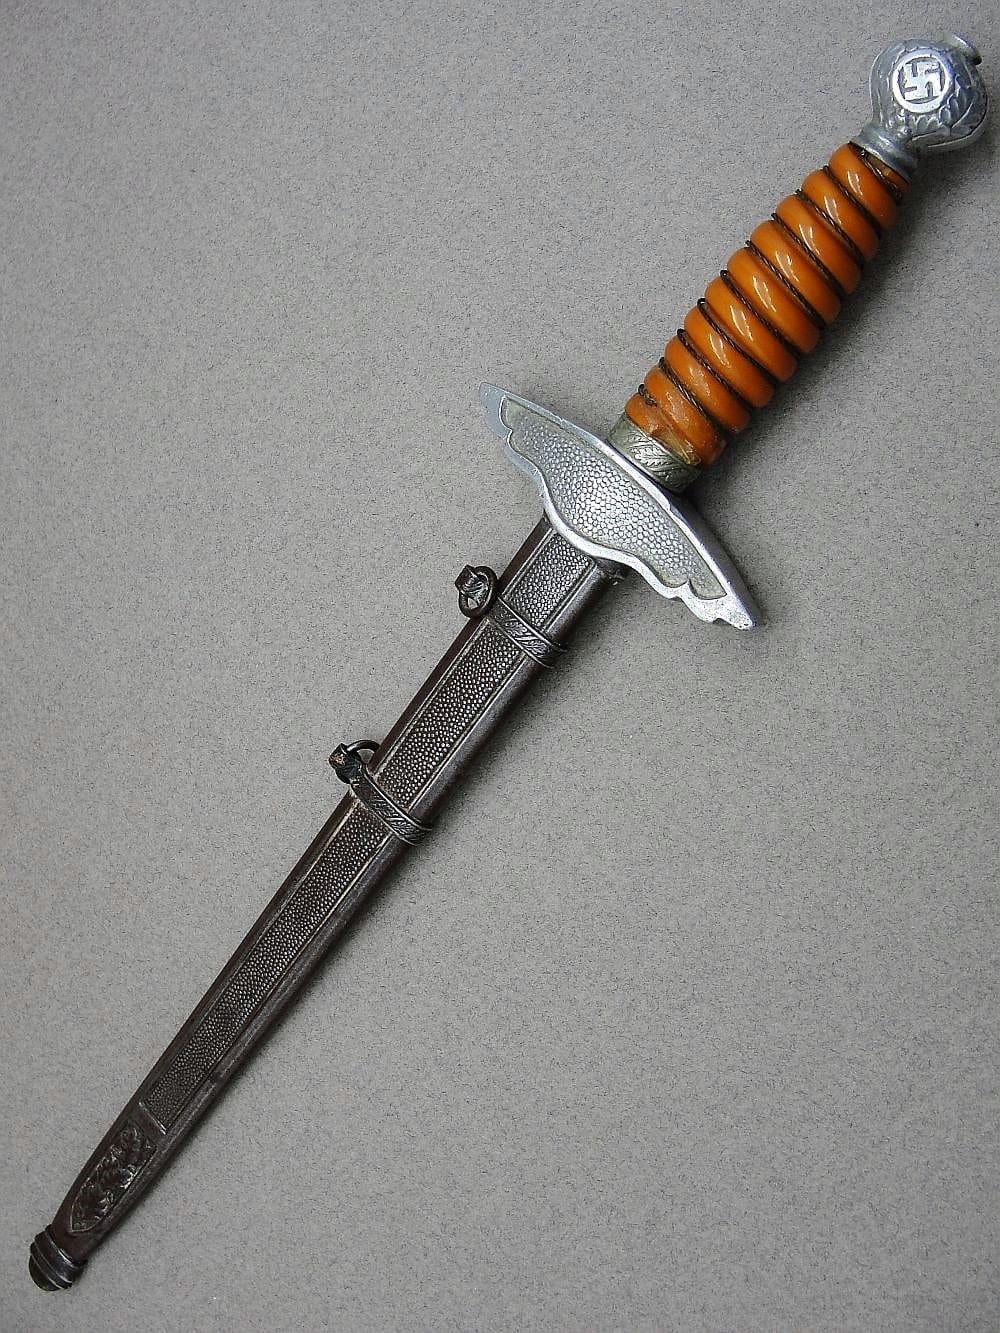 3/4 Size Miniature 2nd Model Luftwaffe Dagger by SMF with Advertising Logo on Blade